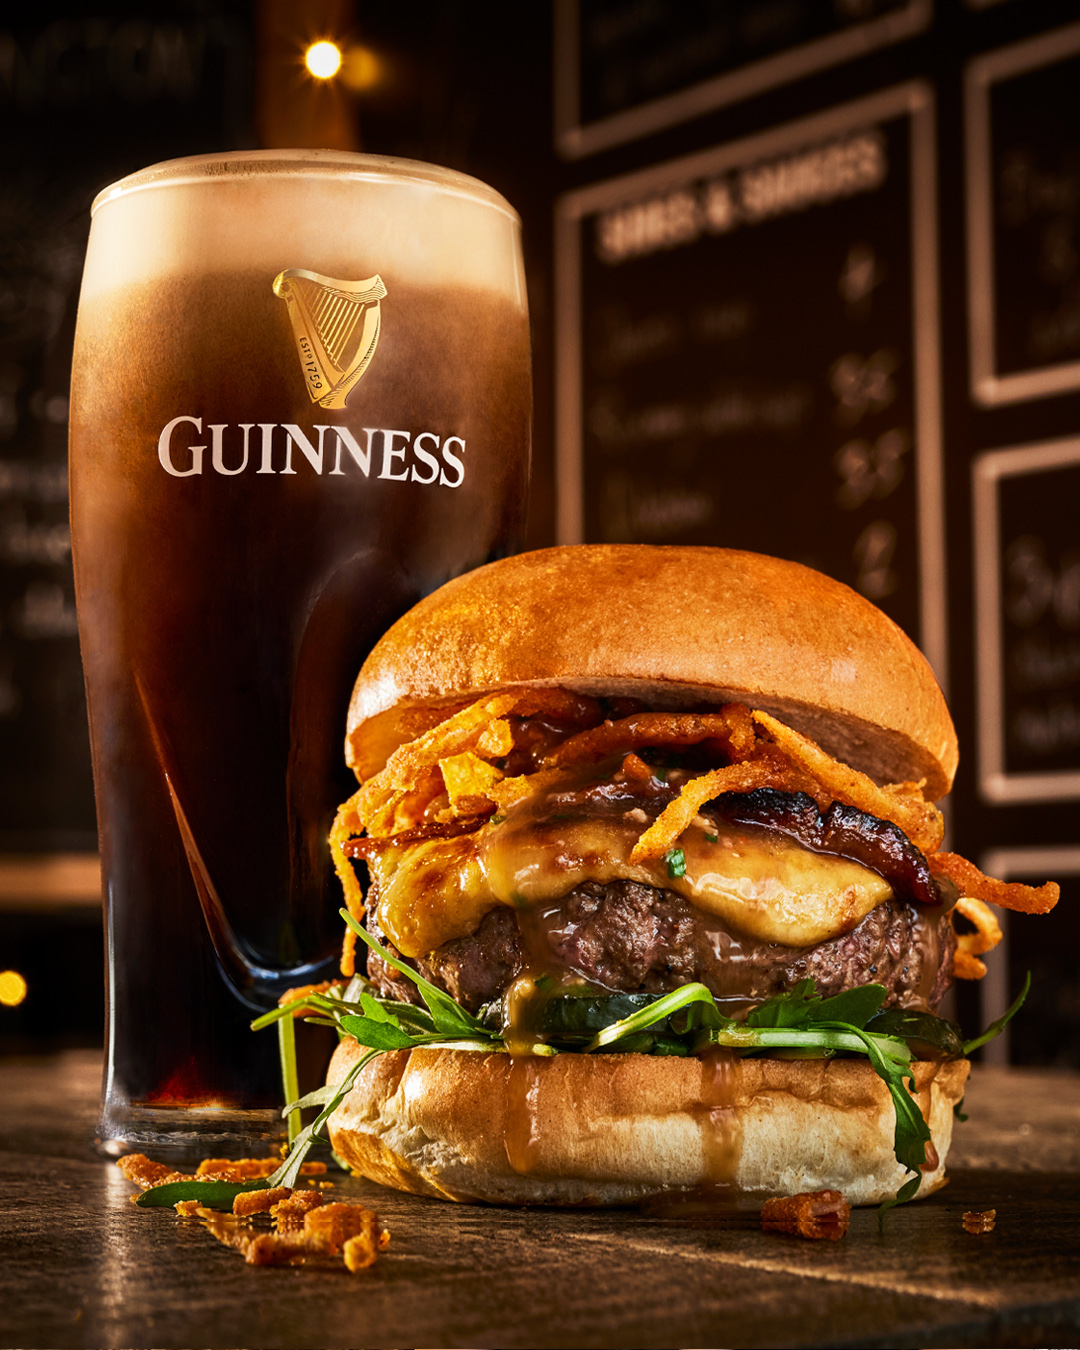 This Manchester restaurant is selling fondue burgers drenched in Guinness gravy, The Manc